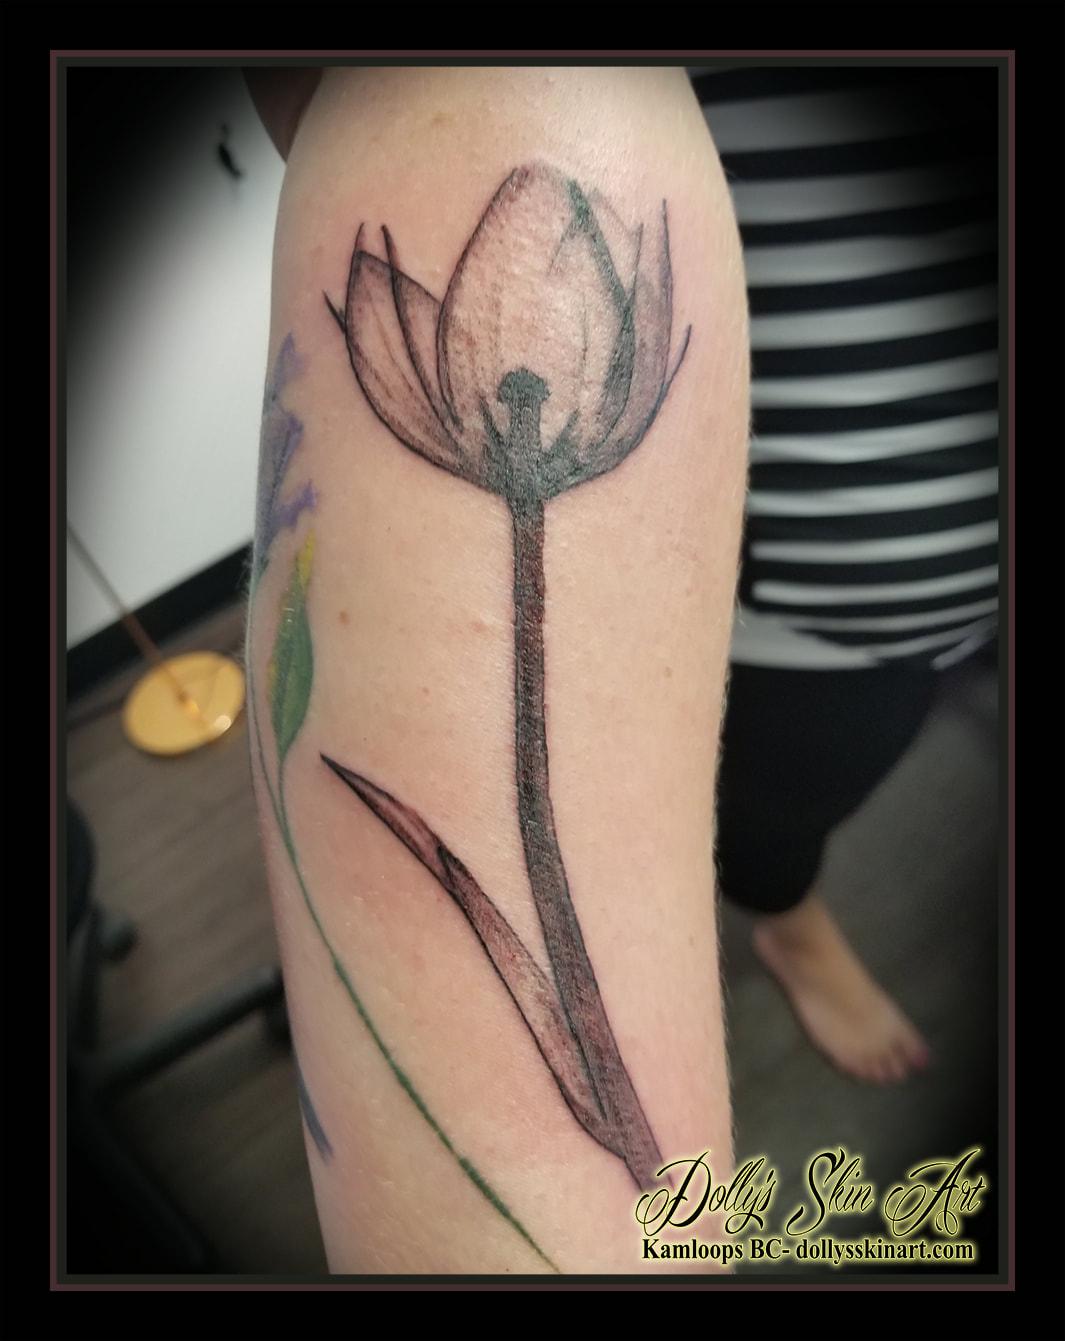 x-ray flower tattoo black and grey xray tulip floral forearm shading tattoo kamloops dolly's skin art